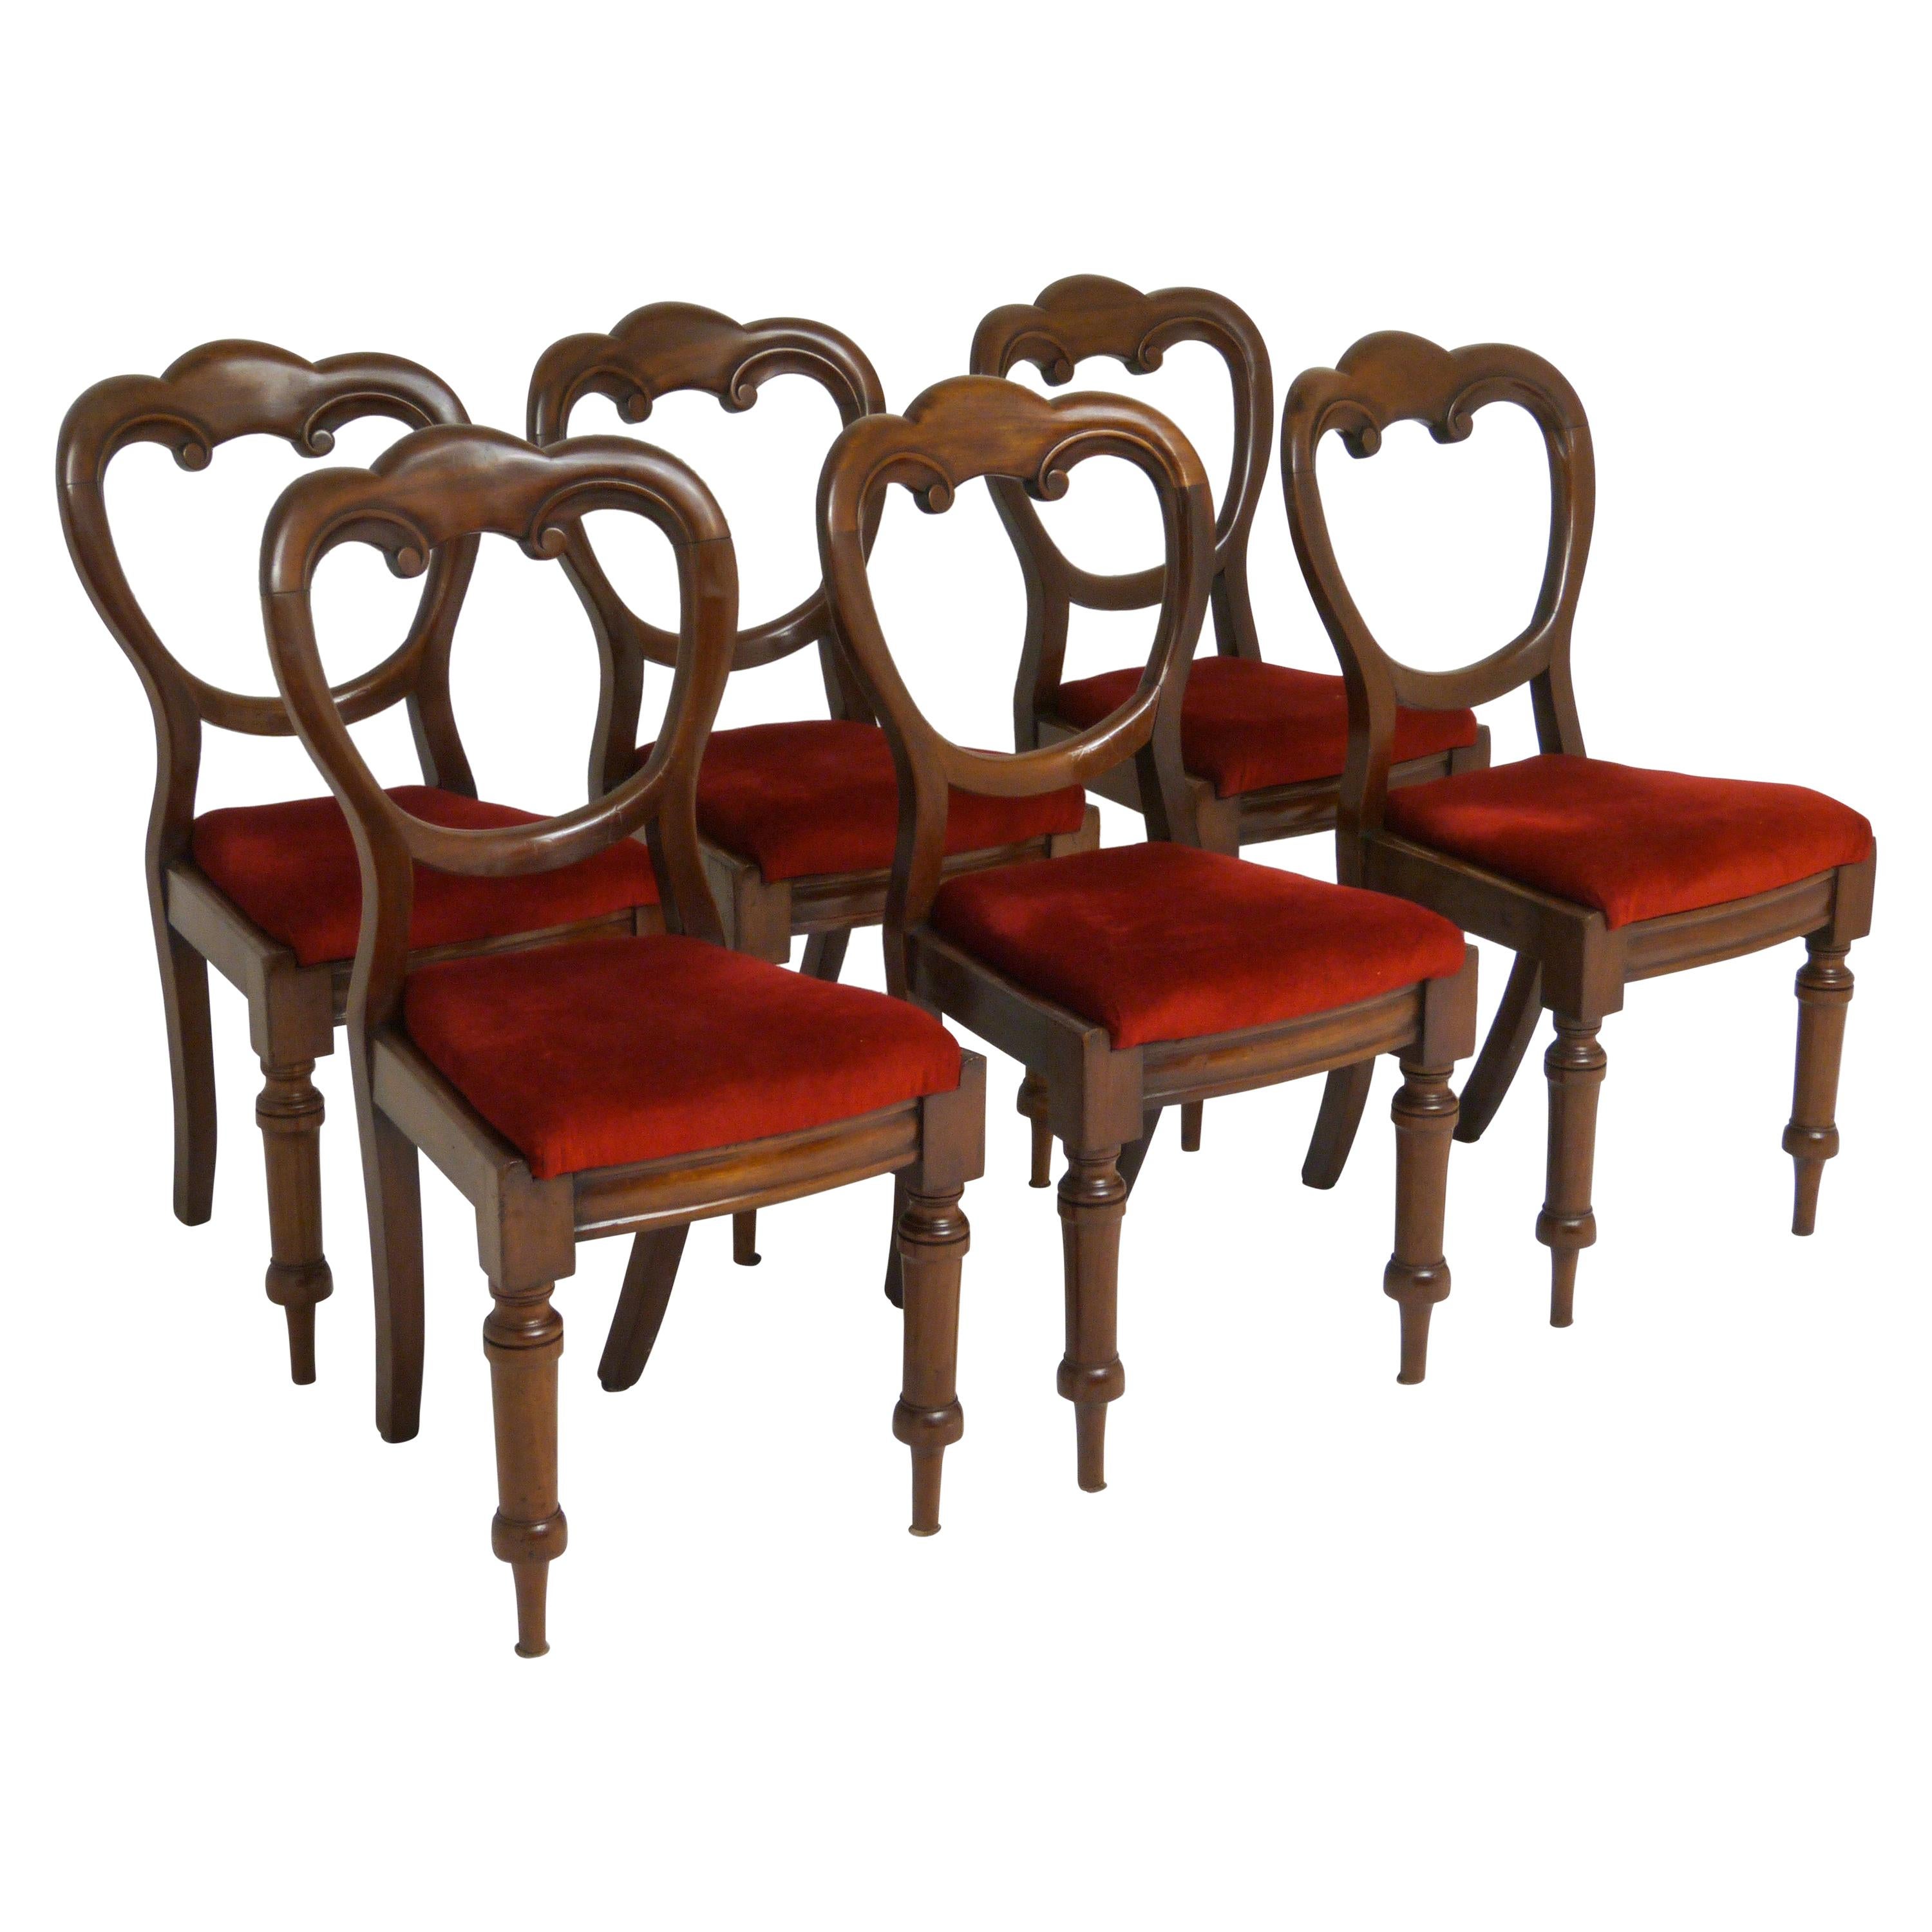 Set of Six Victorian Chairs